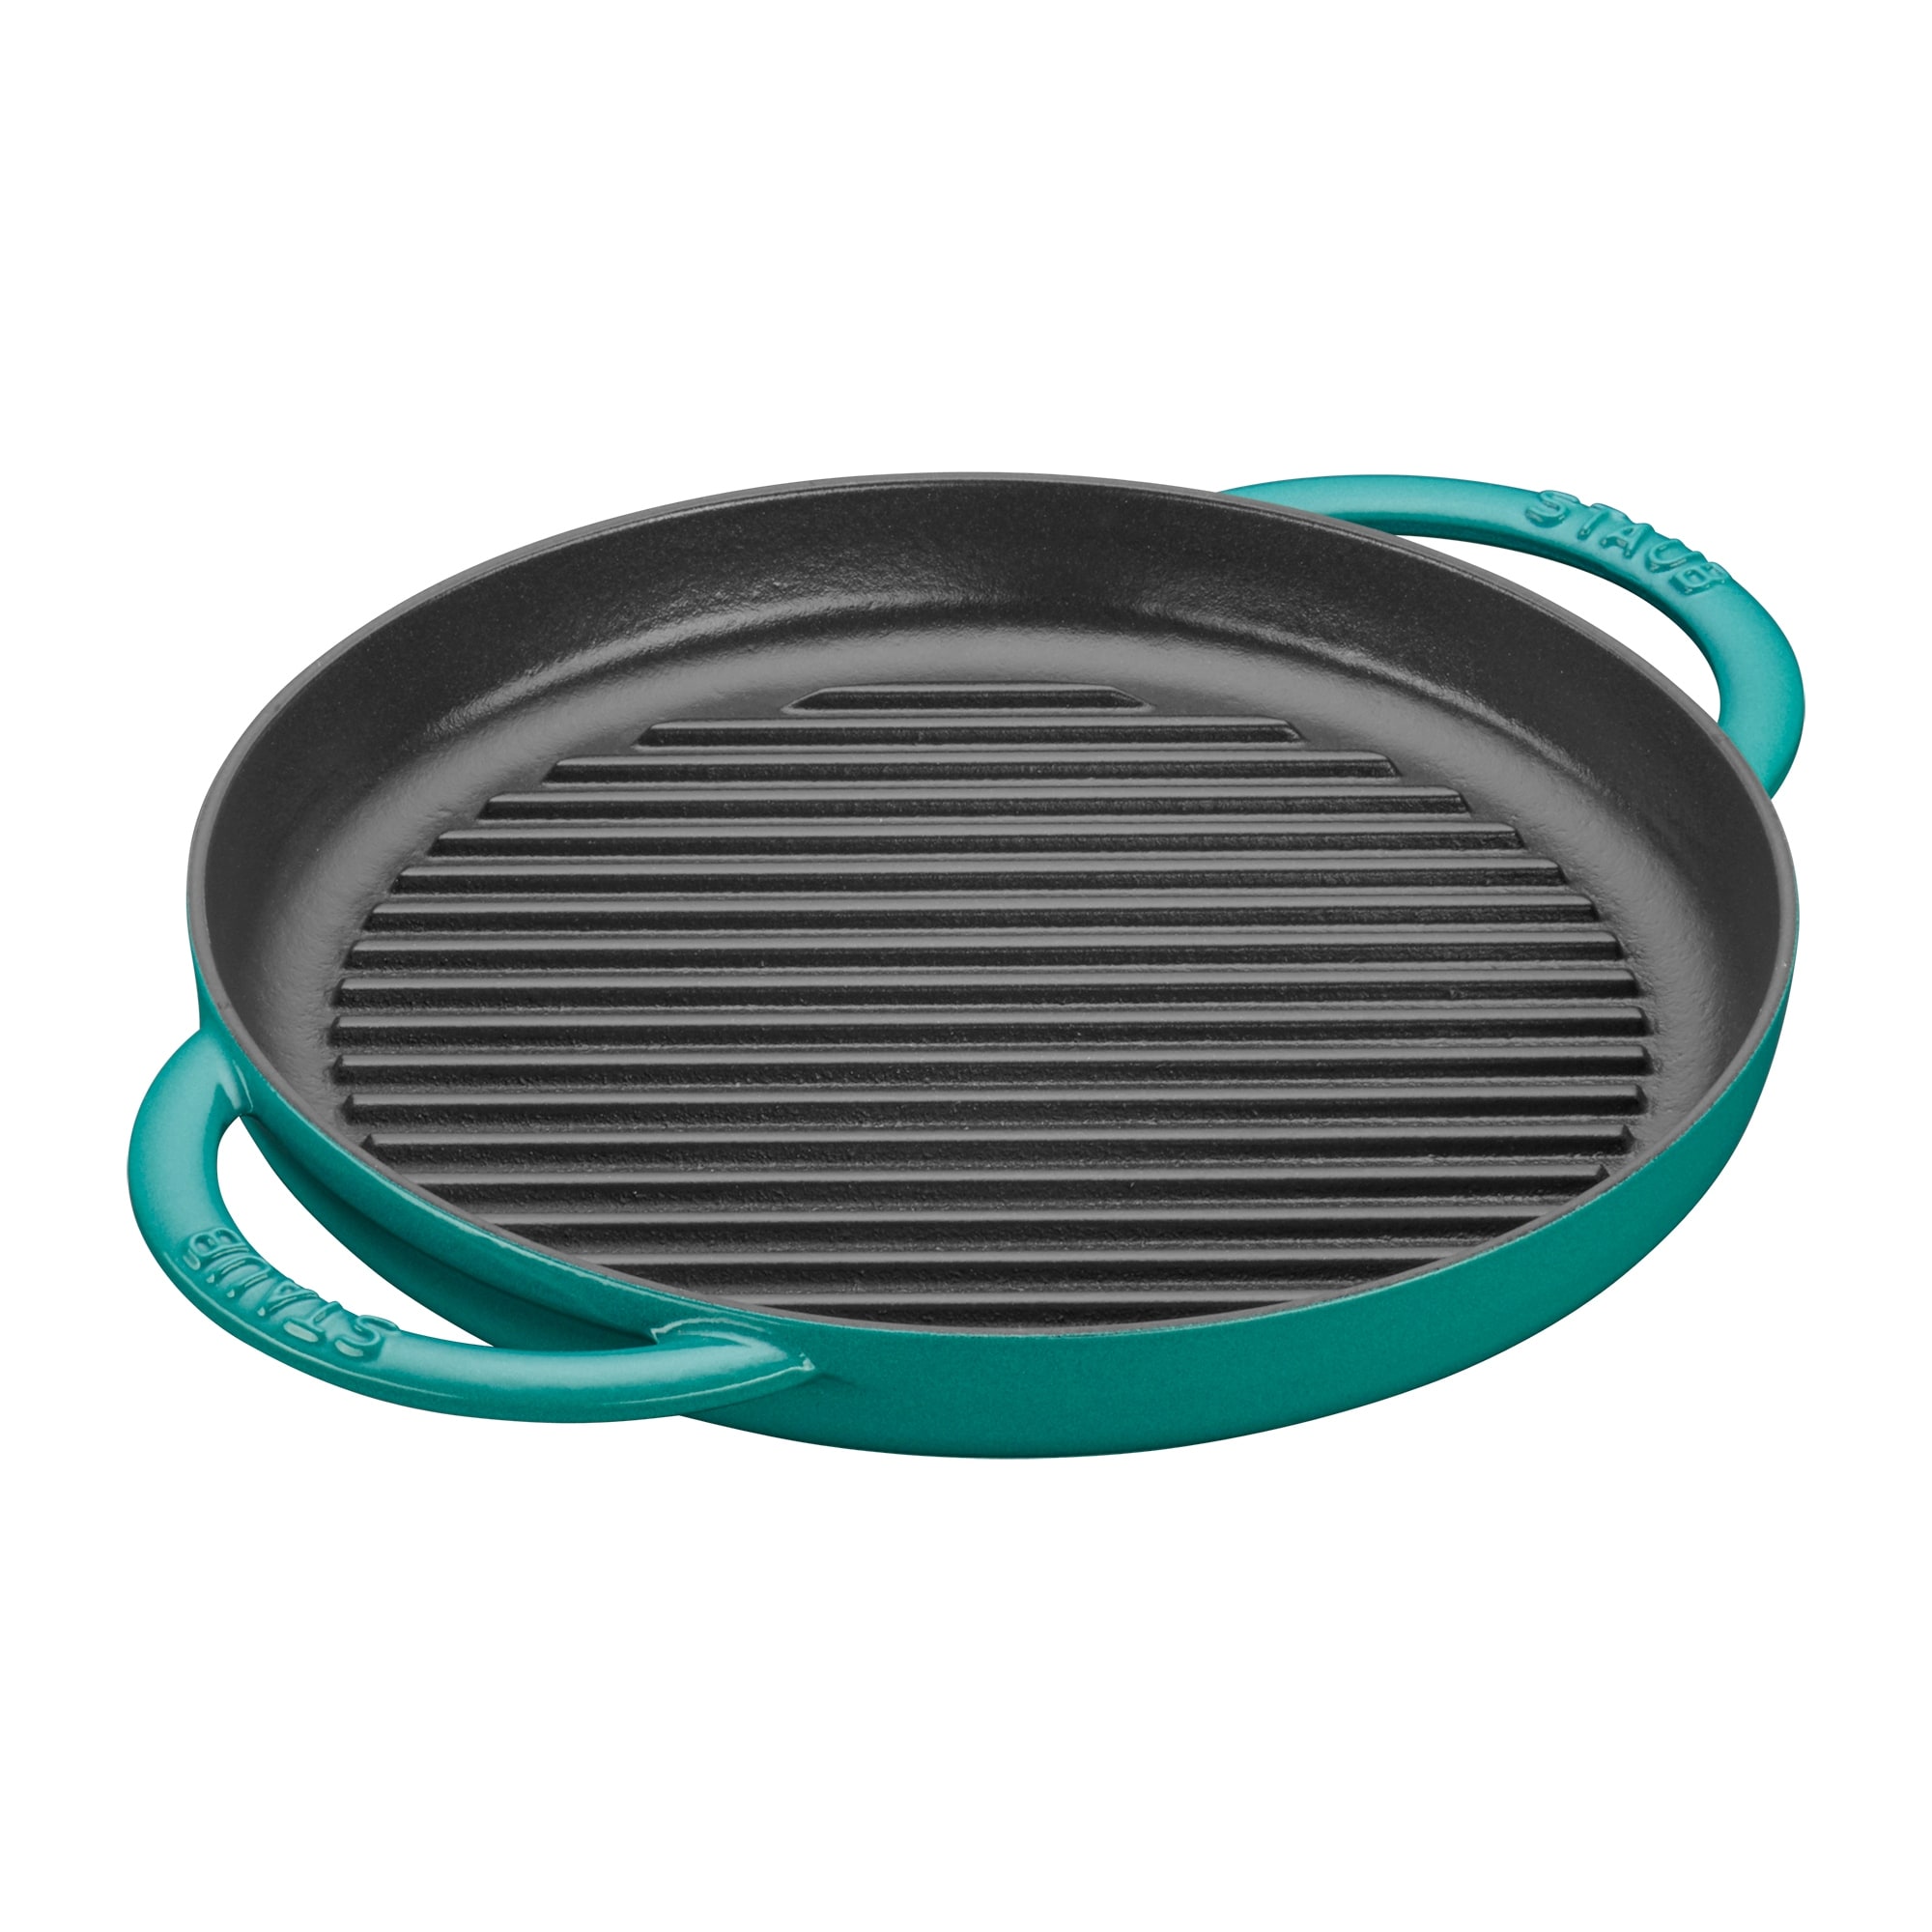 Staub Grill Pans and Griddles - Bed Bath & Beyond